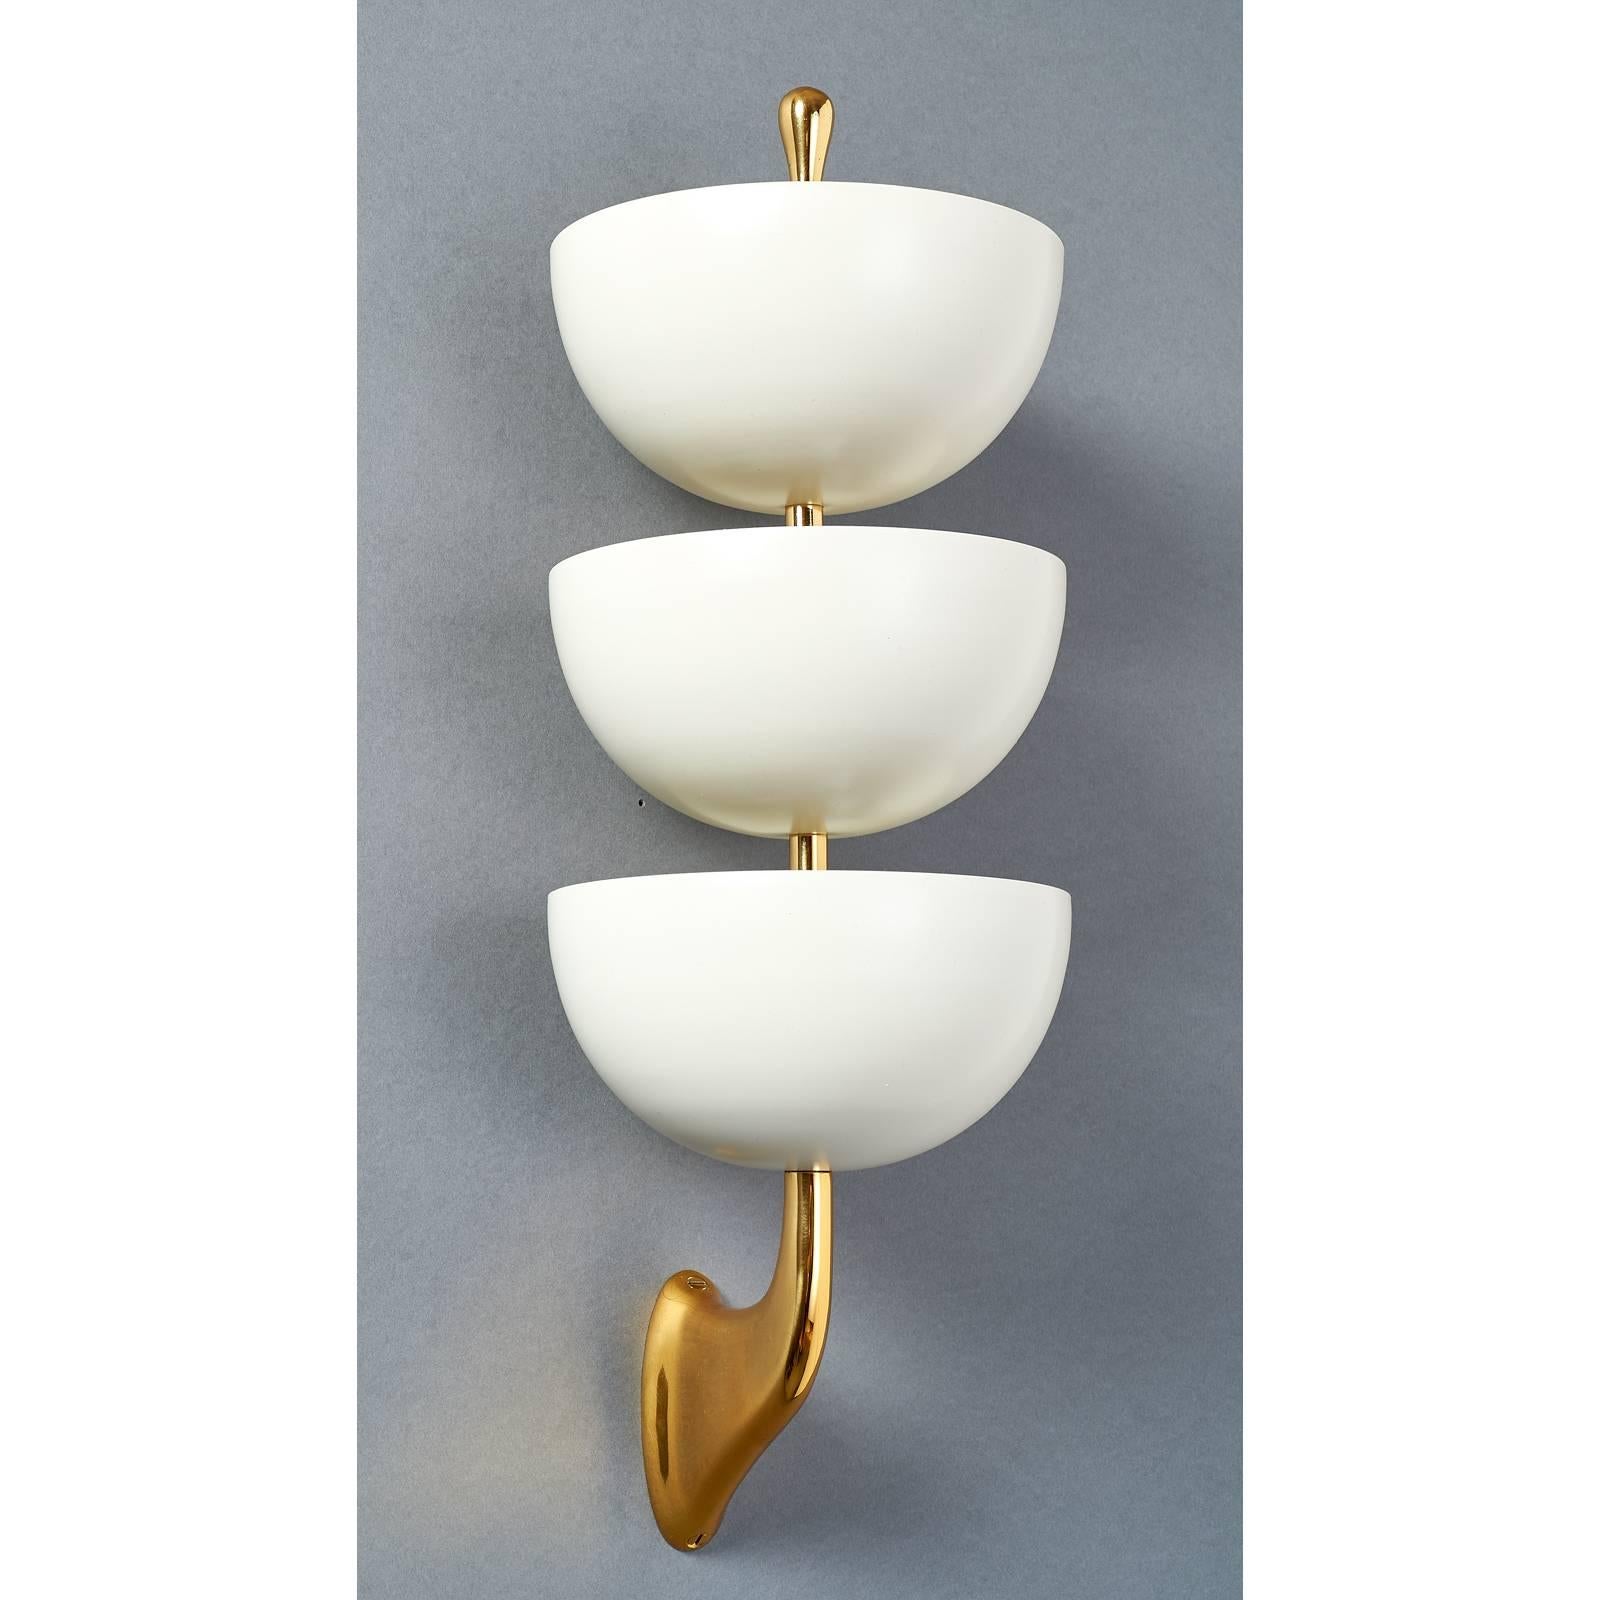 Mid-Century Modern Pair of Three-Tiered Enameled Metal Sconces by Stilnovo, Italy, 1950s